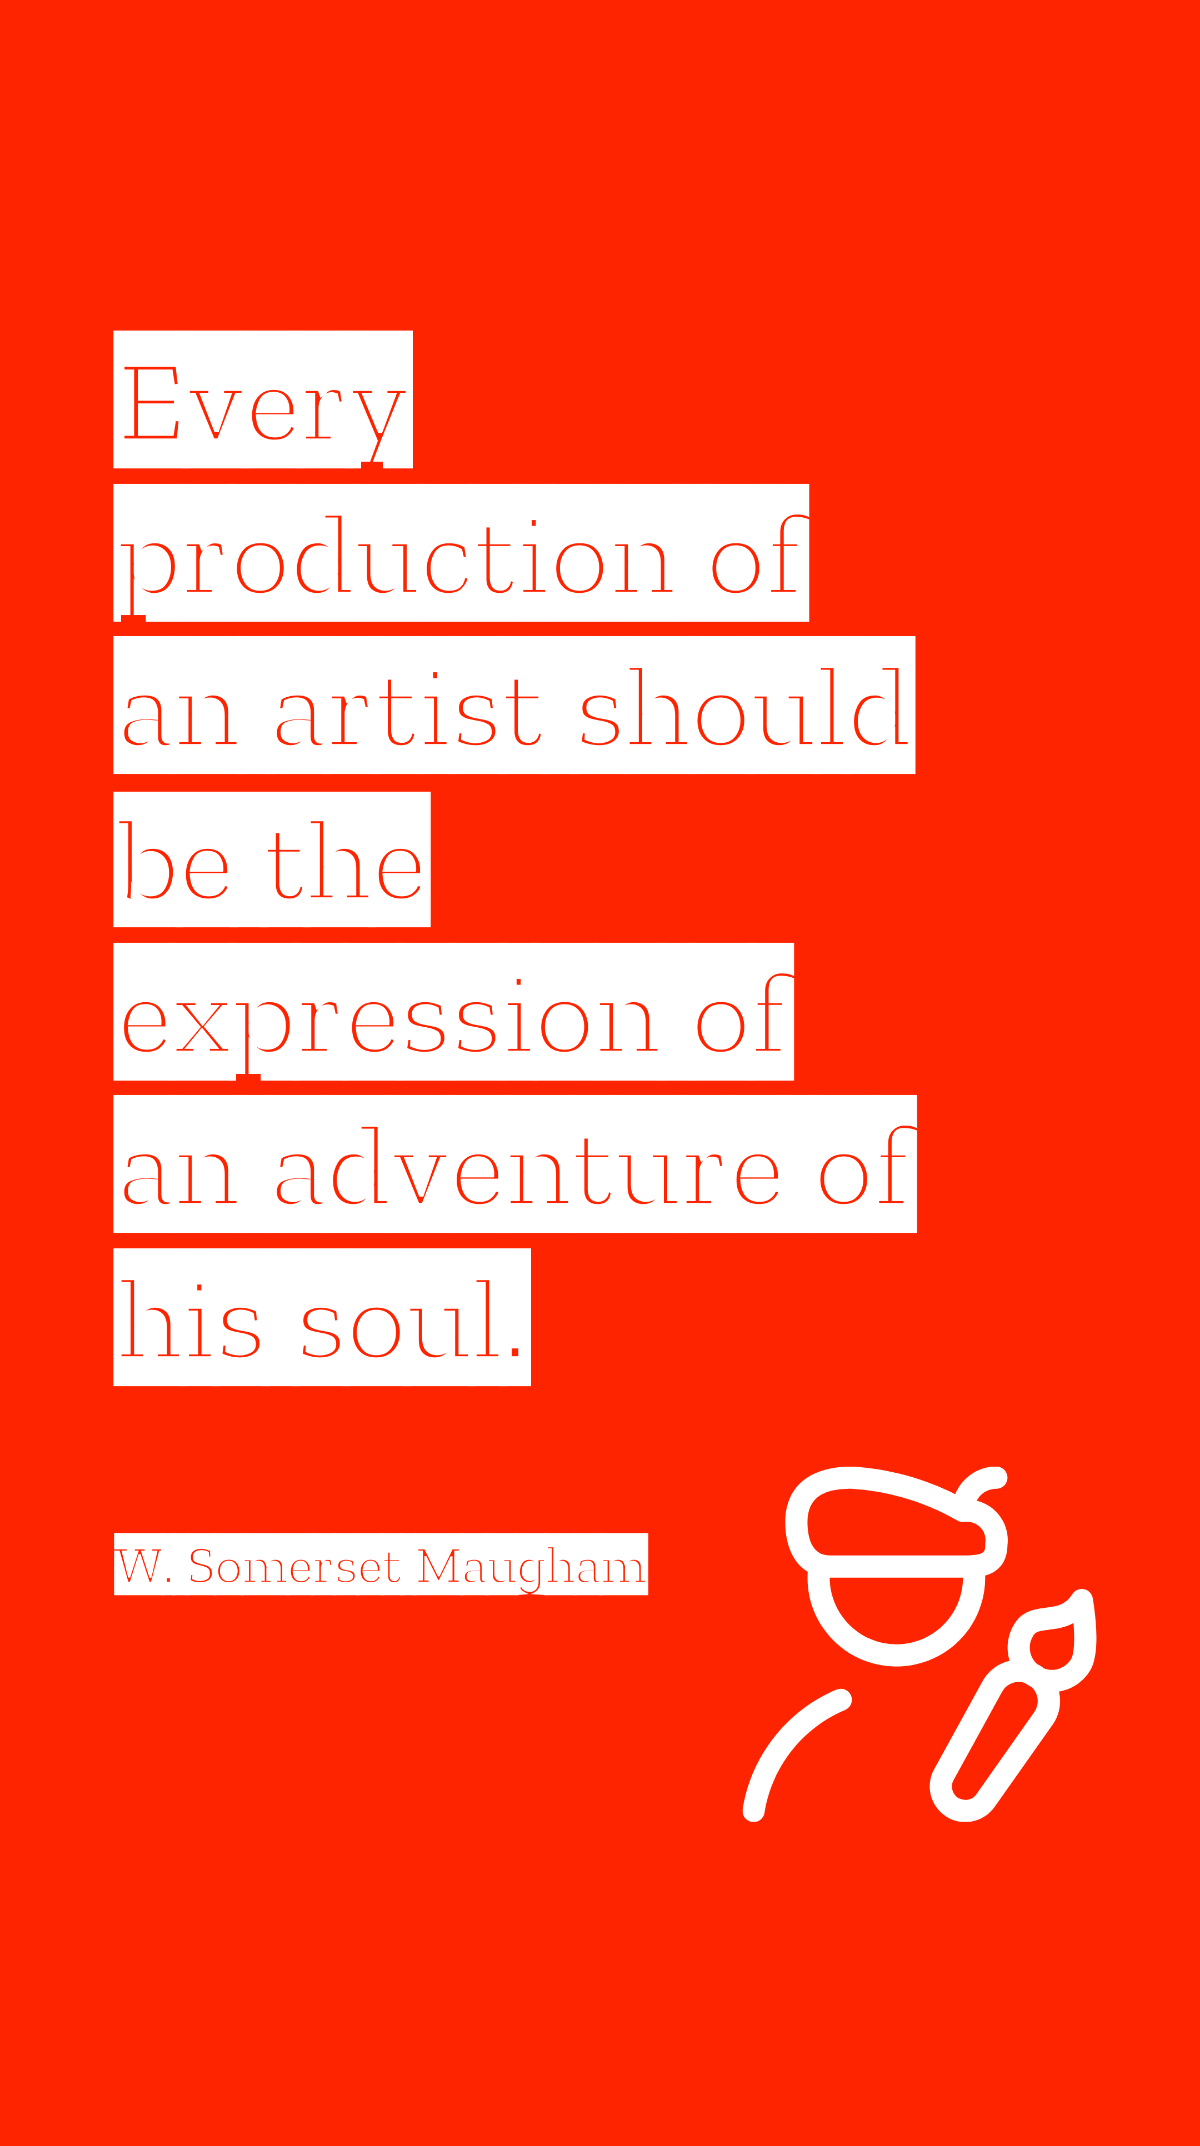 W. Somerset Maugham - Every production of an artist should be the expression of an adventure of his soul.